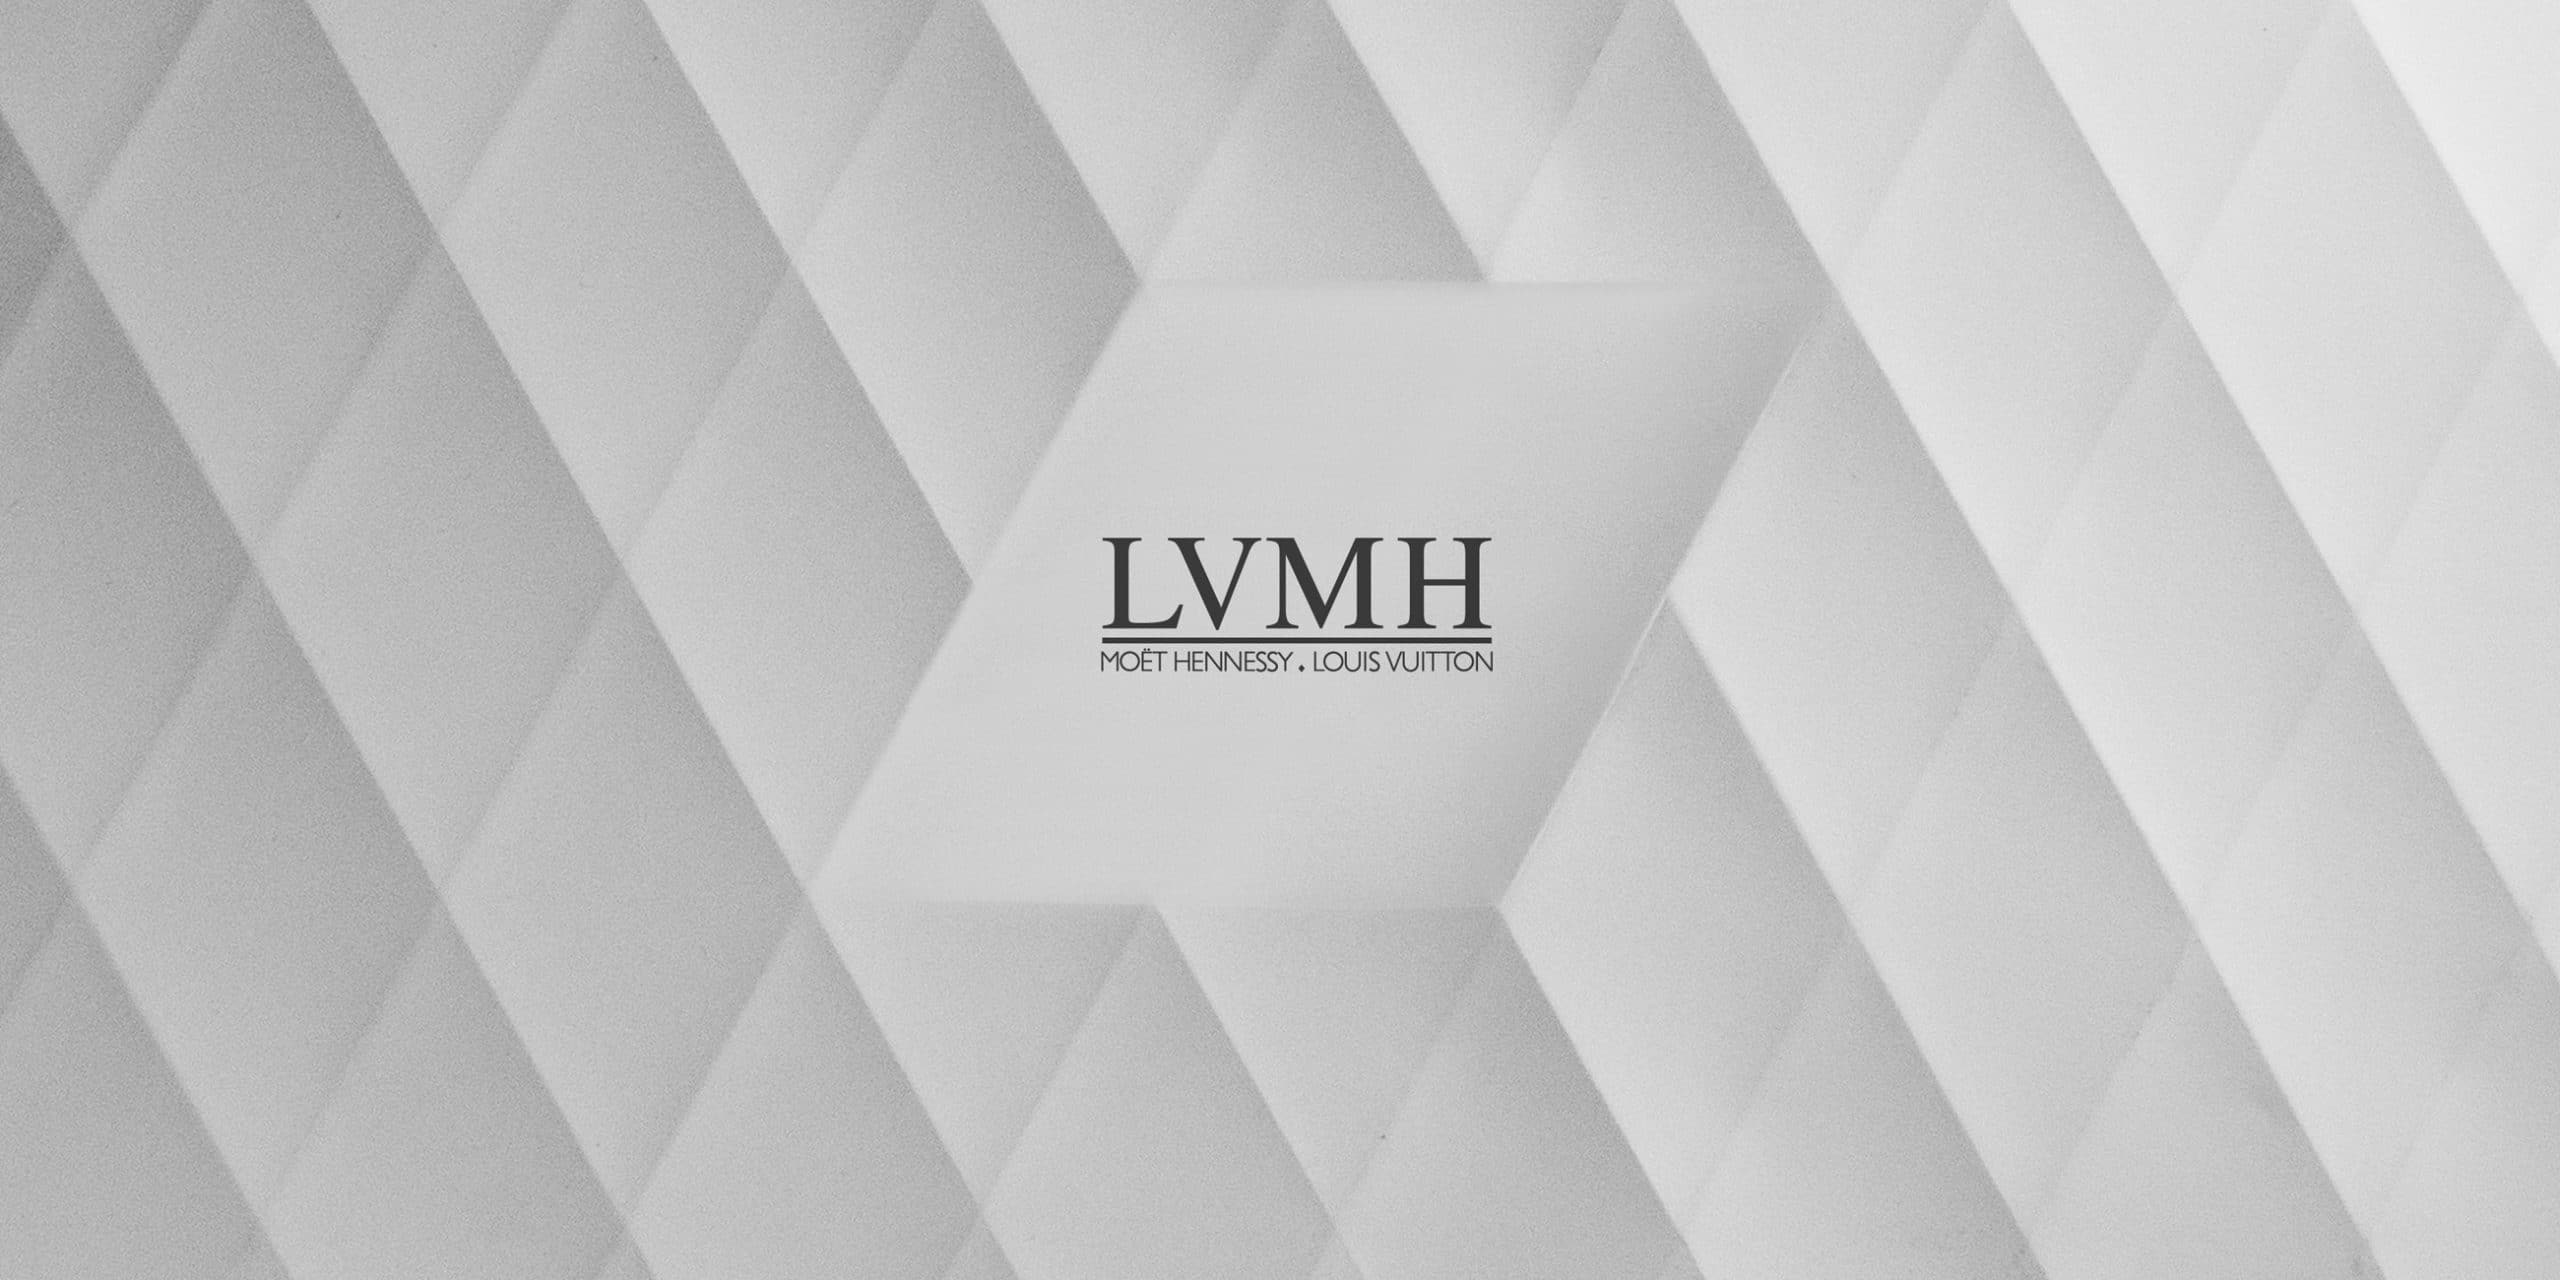 The LVMH share shows all the signs of being significantly